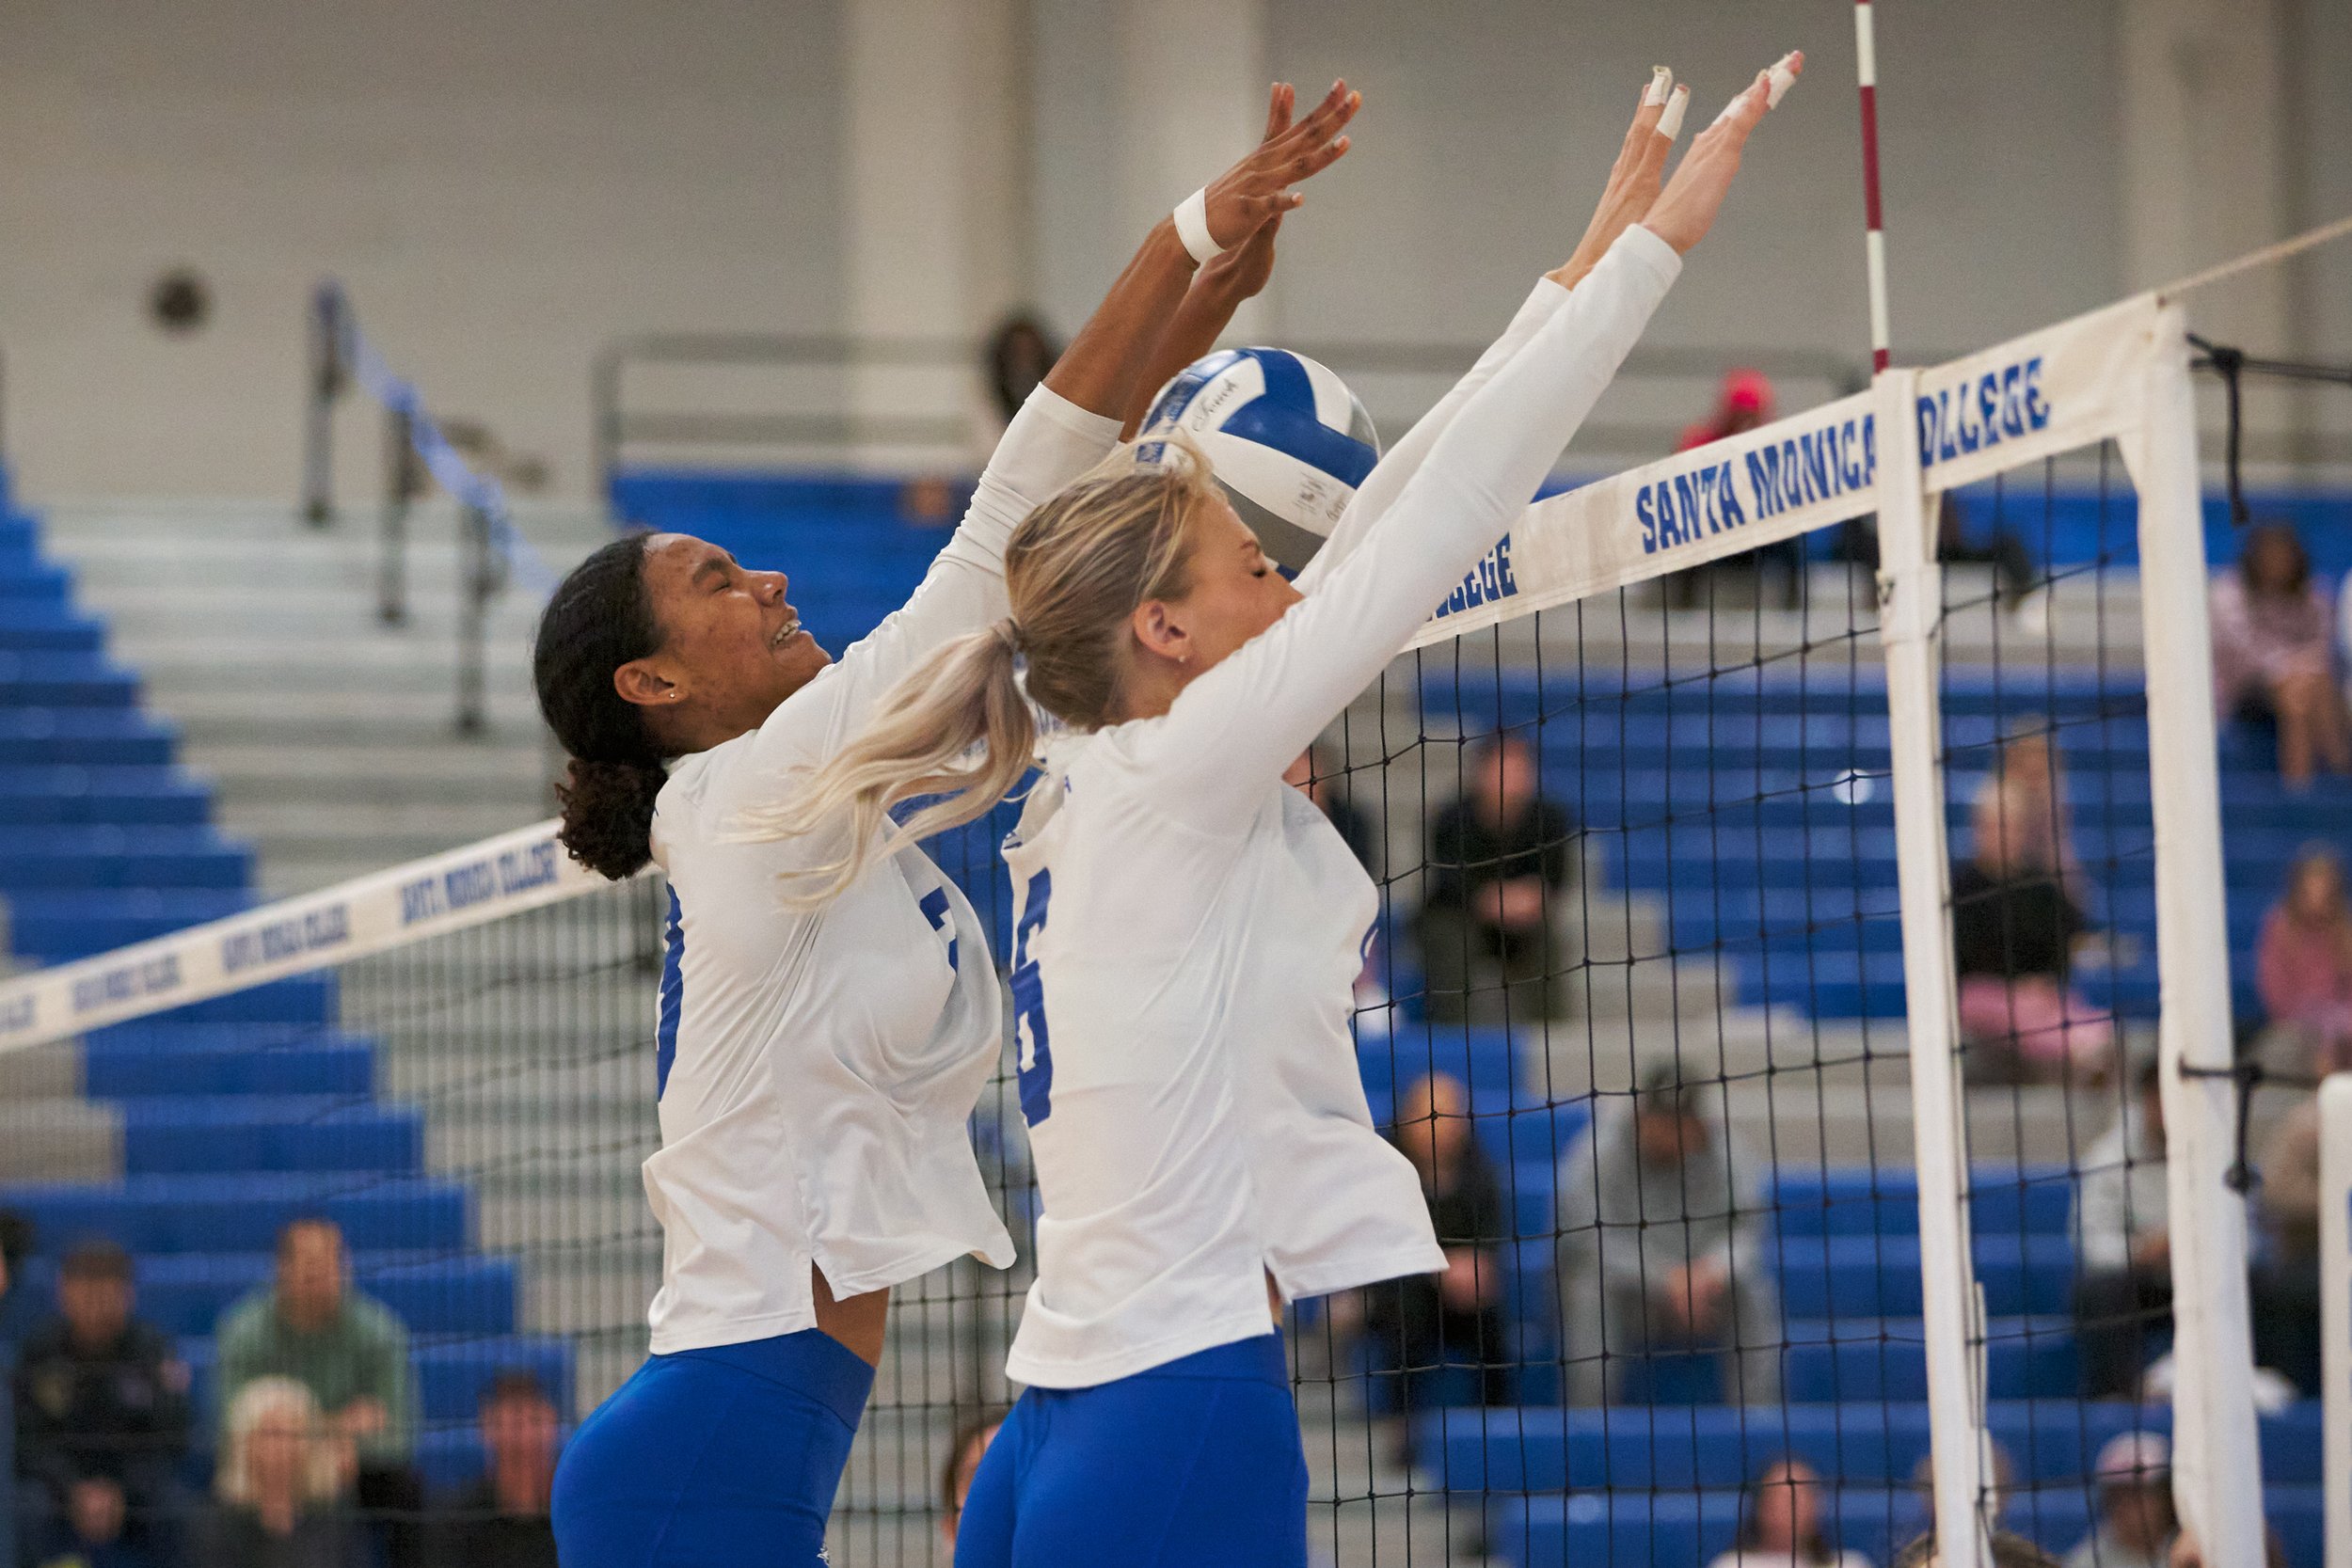  Santa Monica College Corsairs' Rain Martinez and Sophia Lawrance block the ball sent from the Glendale Community College Vaqueros during the women's volleyball match on Wednesday, Nov. 9, 2022, at SMC Gym in Santa Monica, Calif. The Corsairs won 3-0